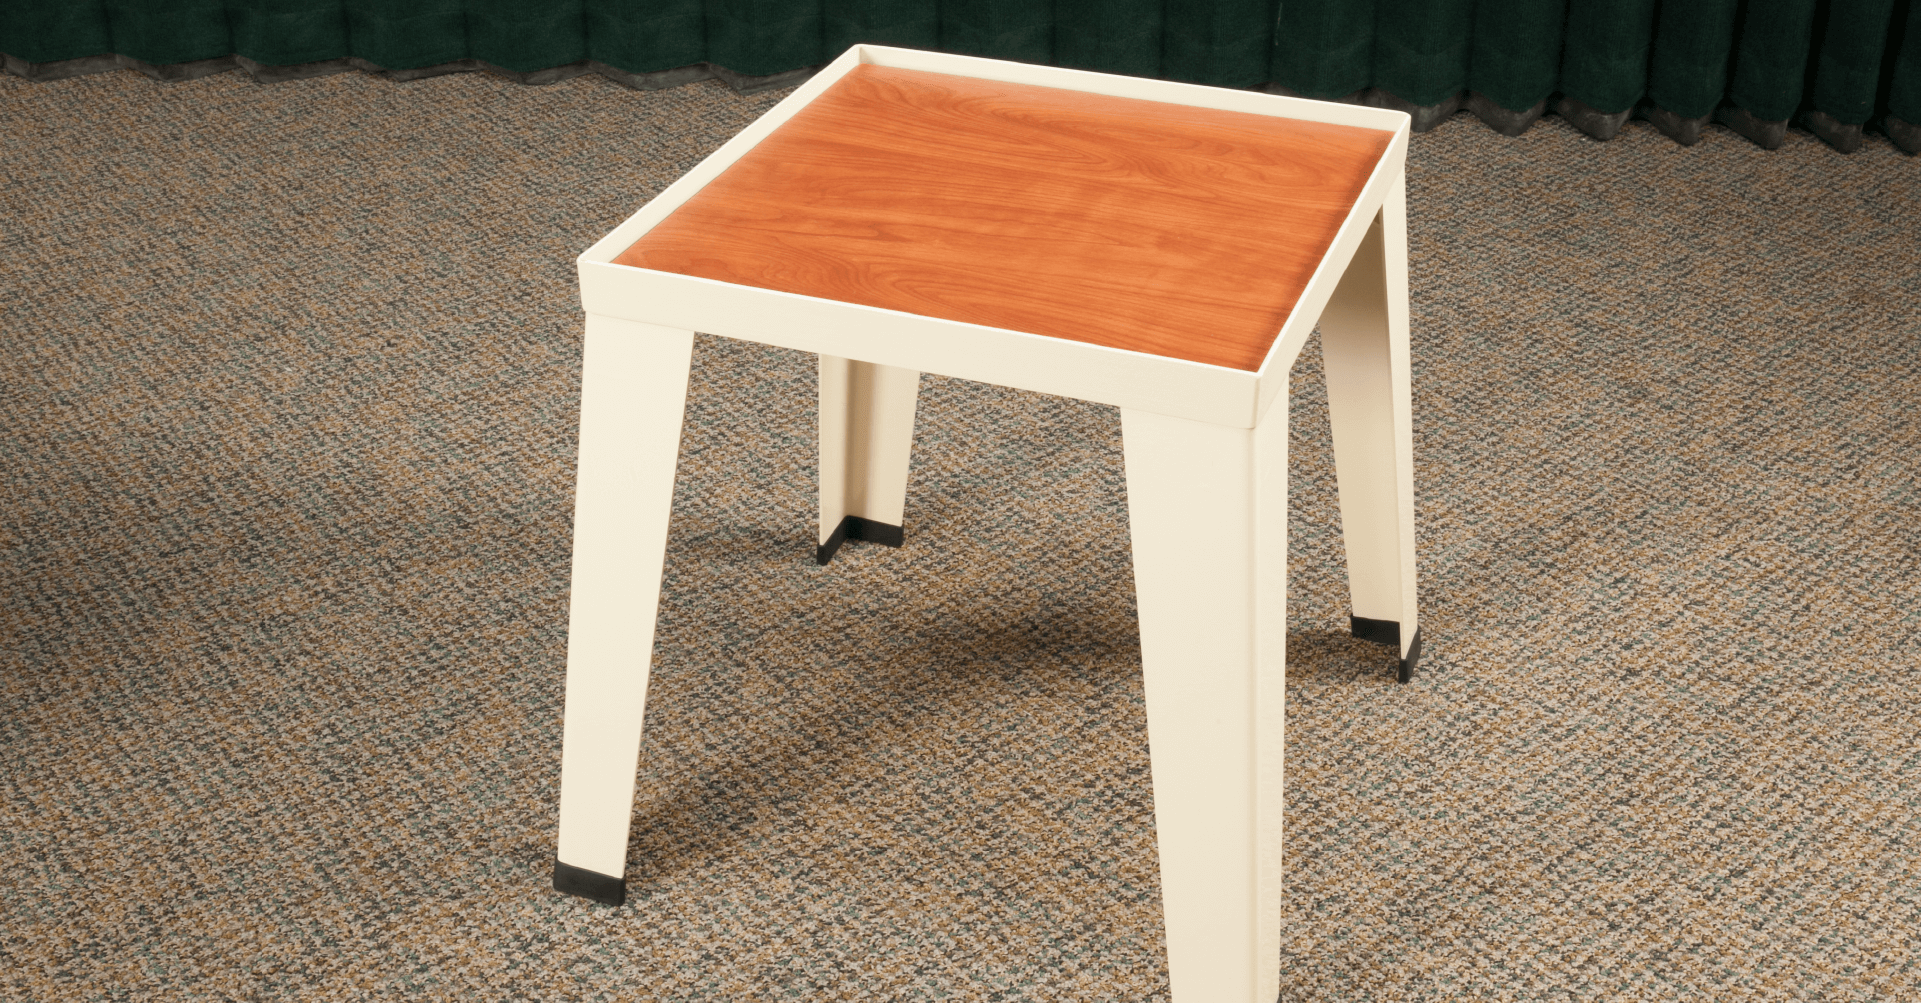 central city beds product Table